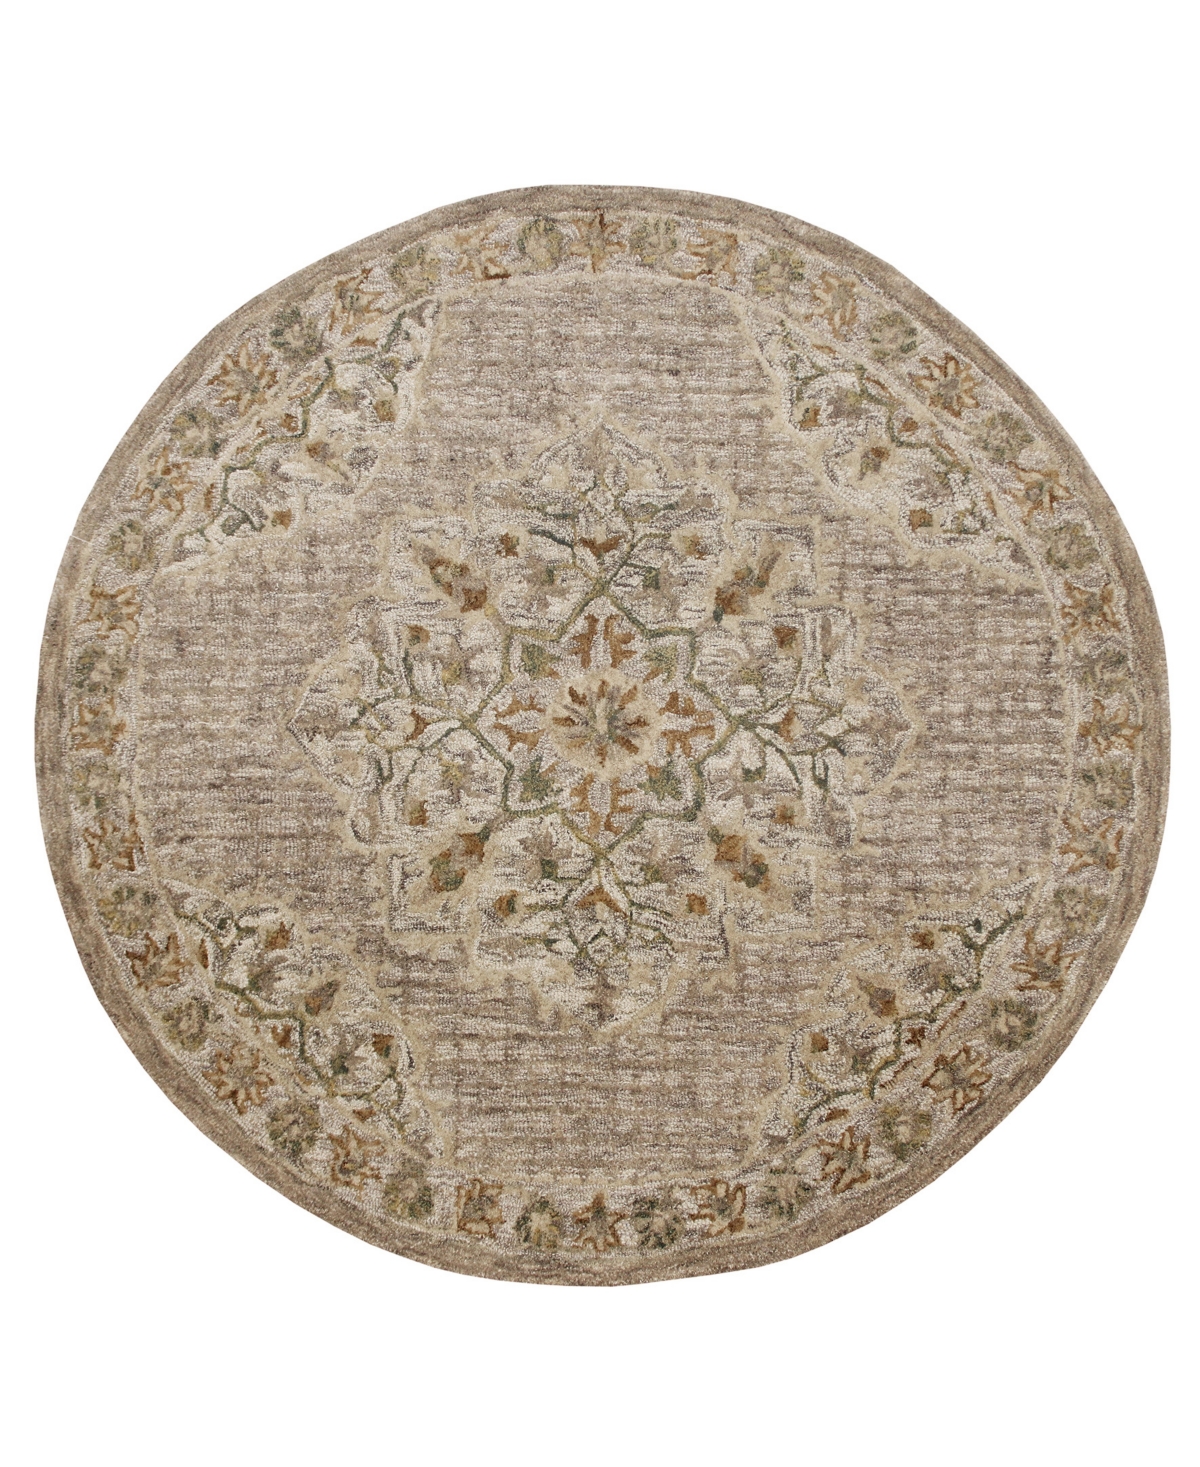 Lr Home Sweet Sinuo54120 4' X 4' Round Area Rug In Beige